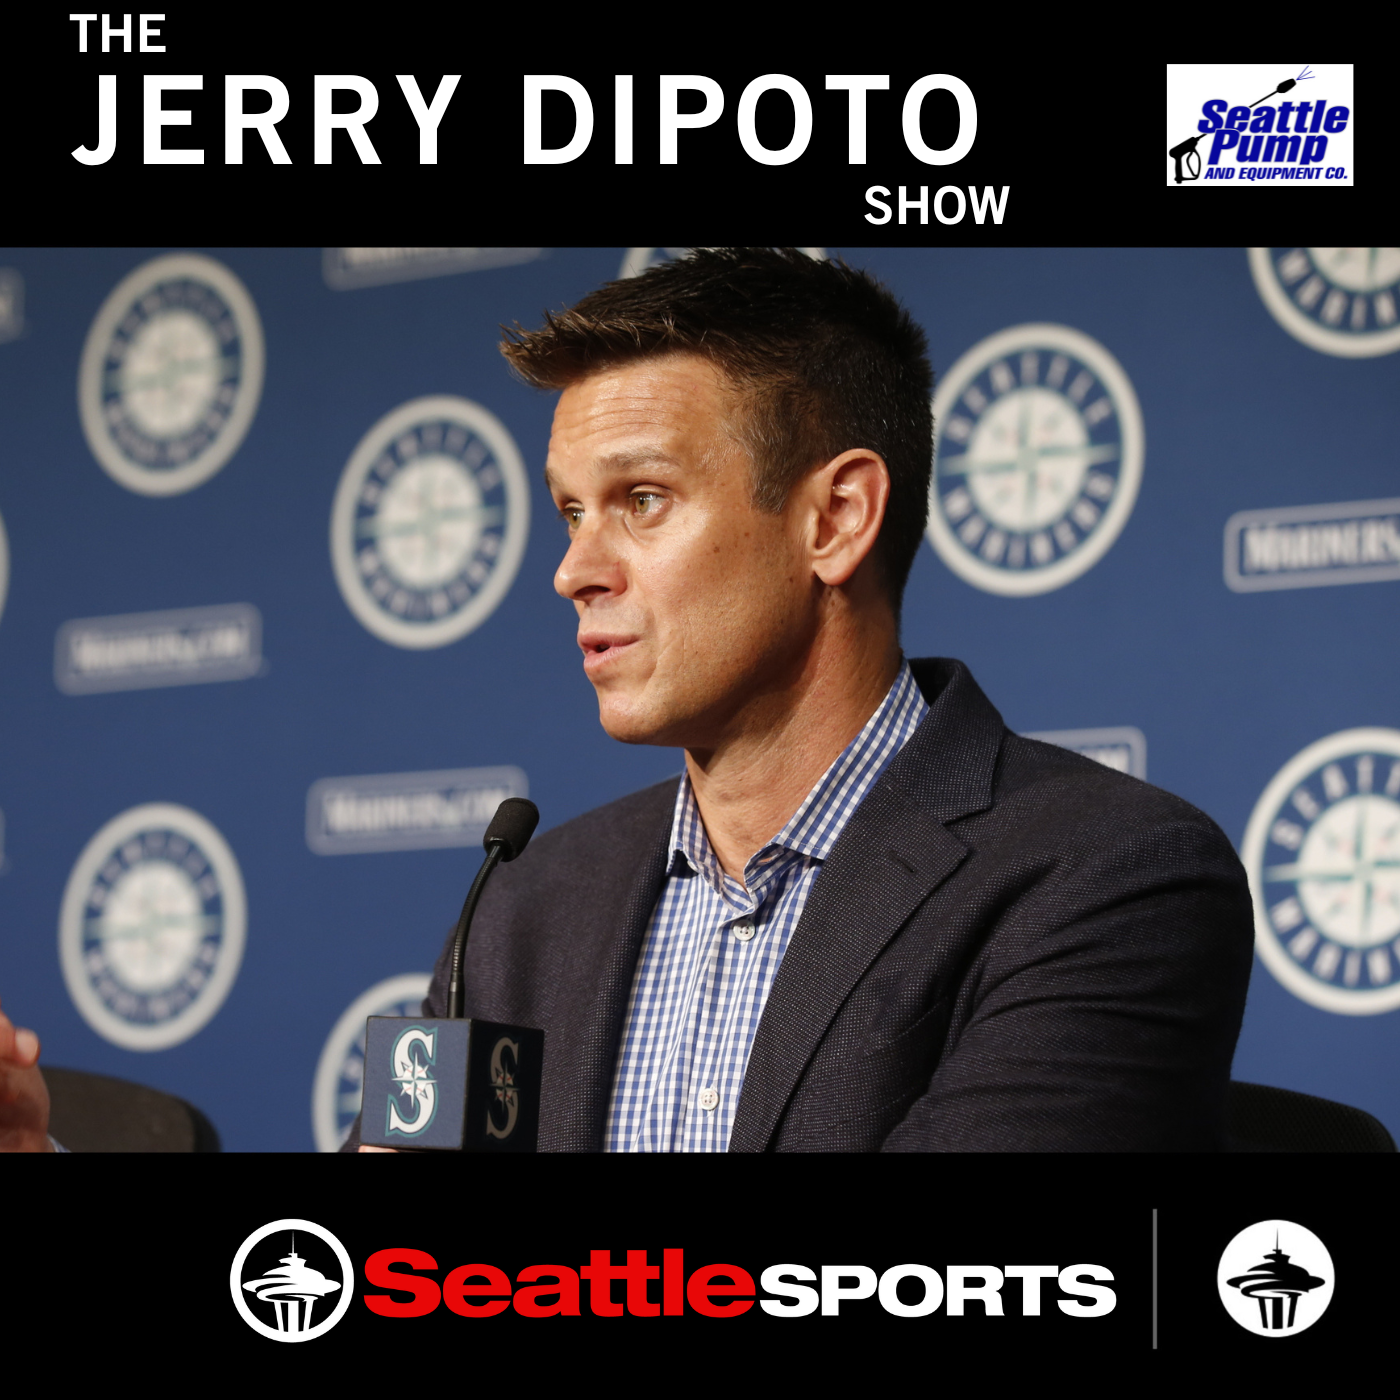 Jerry Dipoto expresses the growth of Kikuchi since his 1-inning start